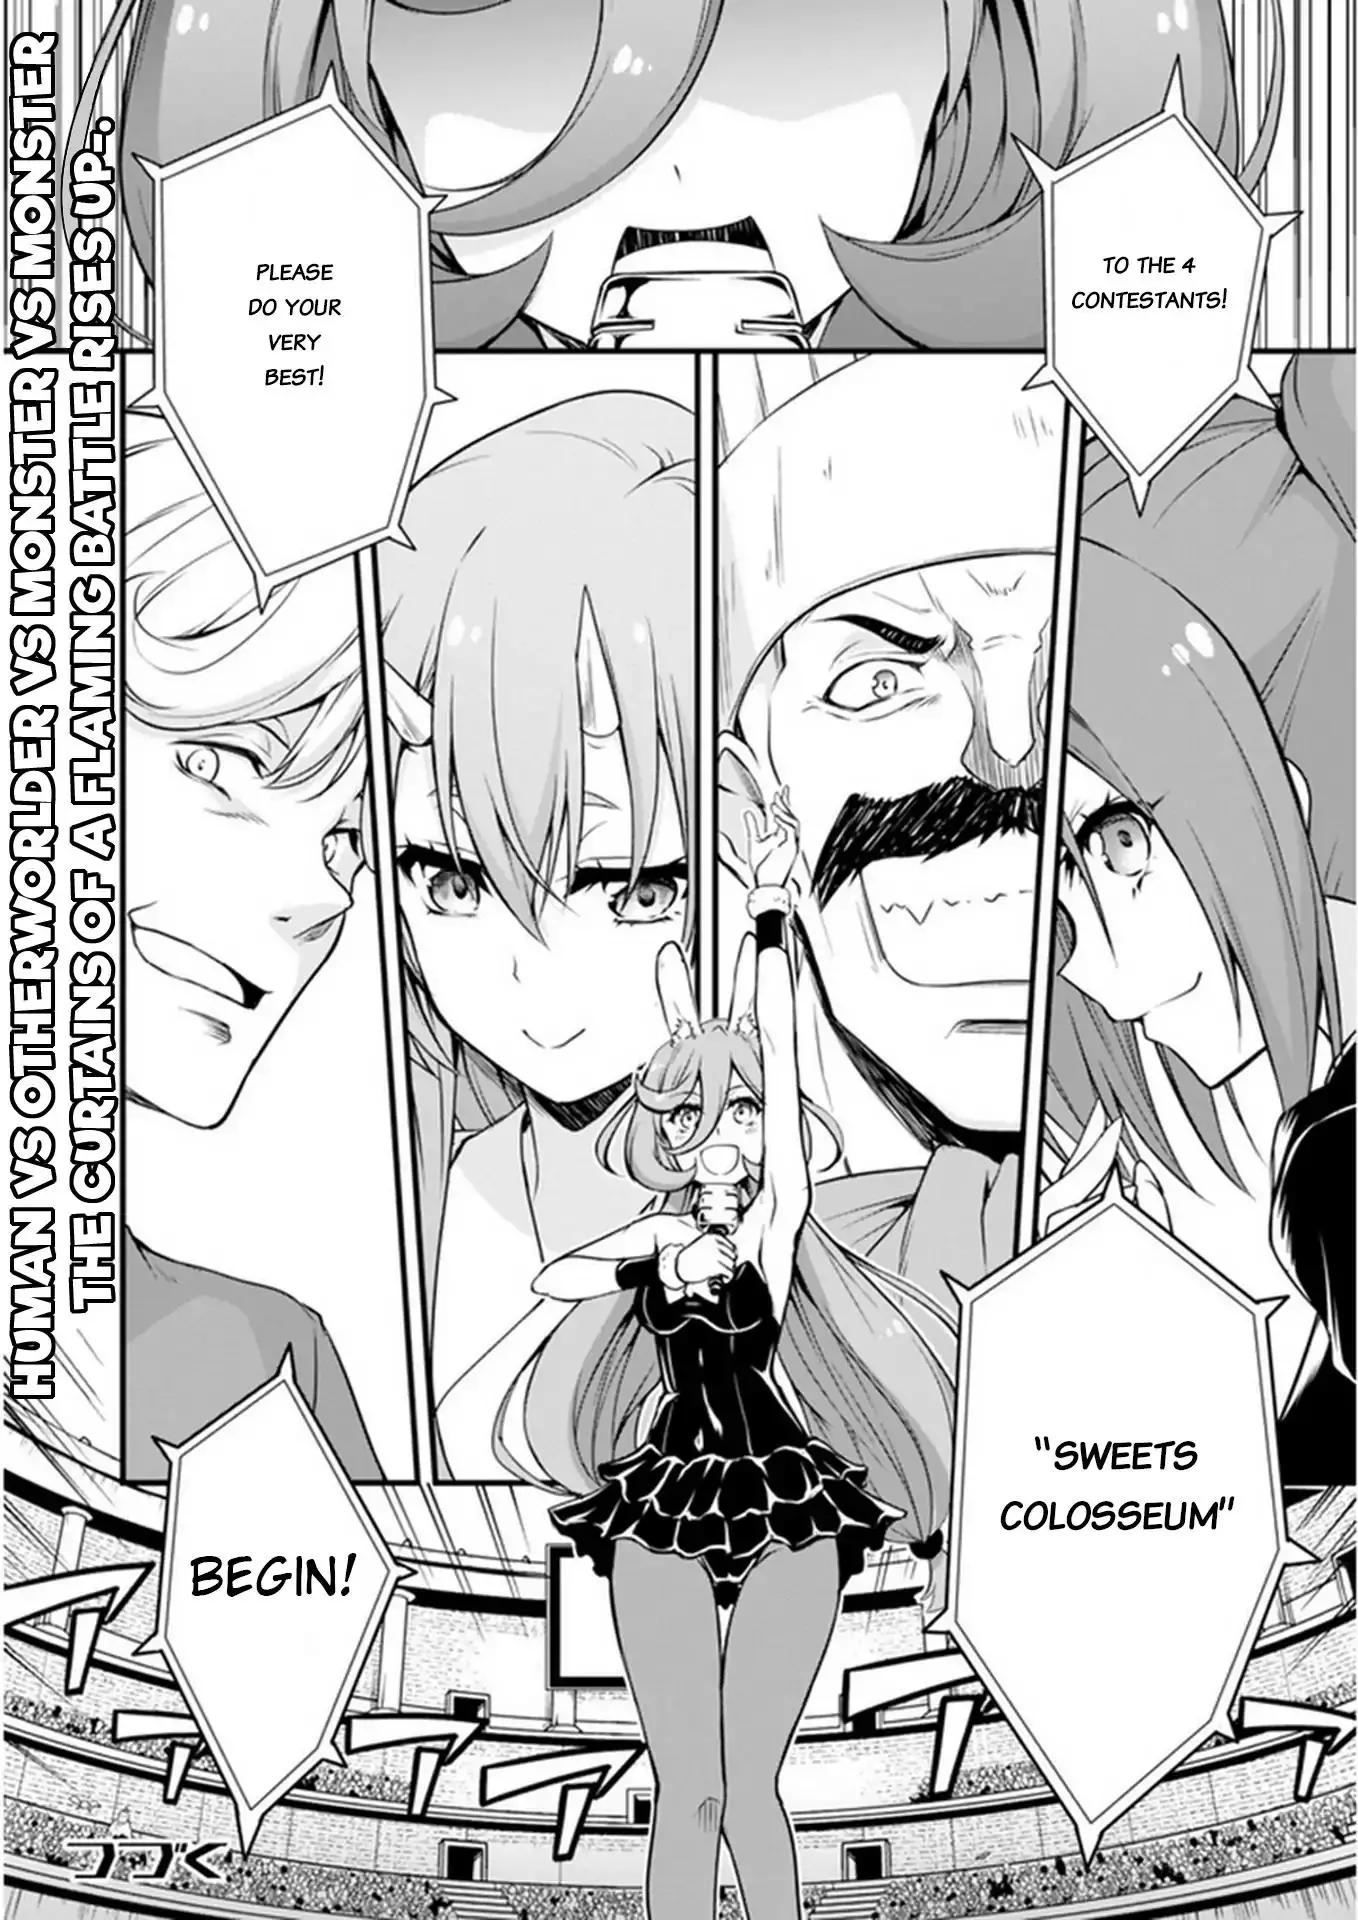 Tensei Shitara Slime Datta Ken: The Ways of Strolling in the Demon Country - 16 page 23